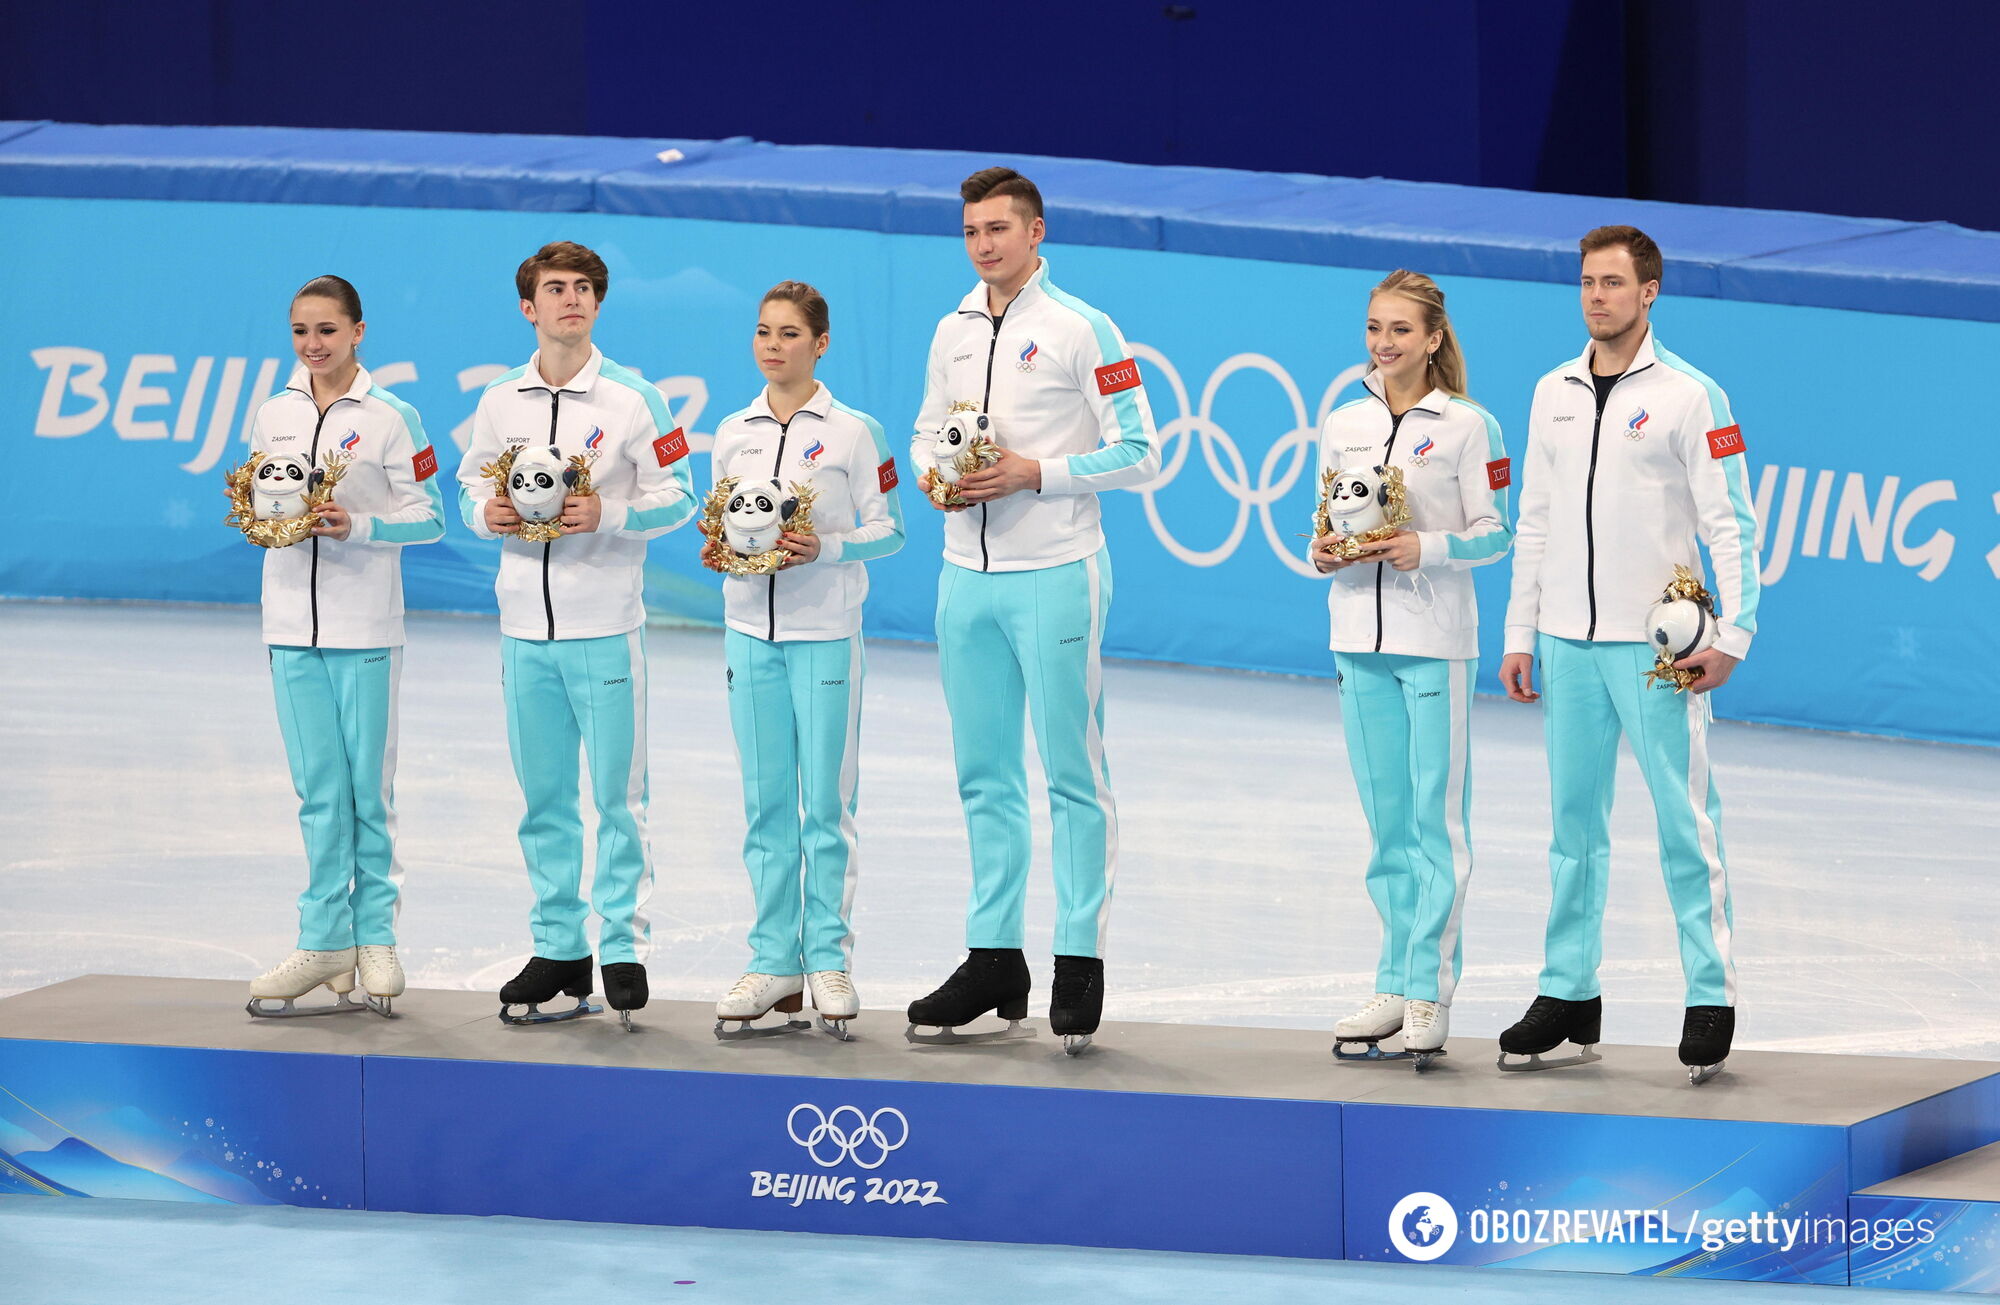 Russian figure skaters at the 2022 Olympics